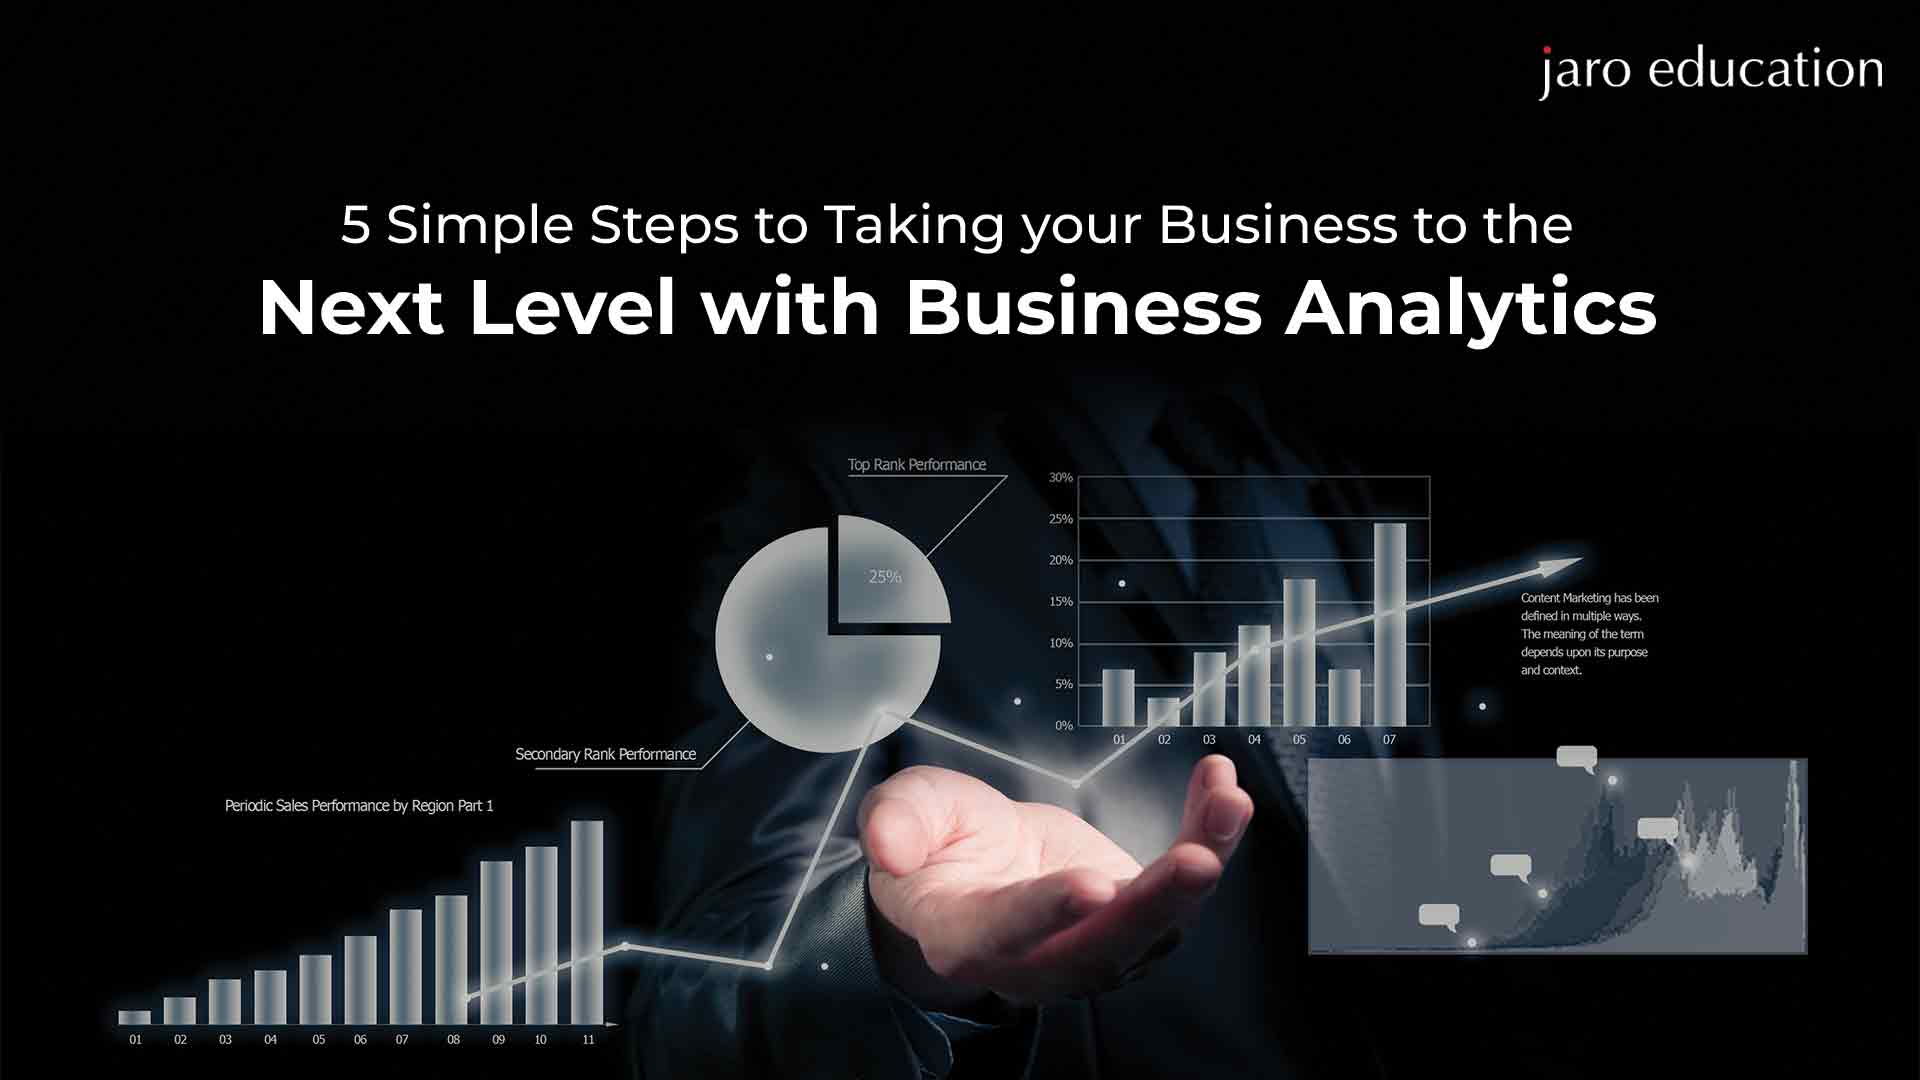 5-Simple-Steps-to-Taking-your-Business-to-the-Next-Level-with-Business-Analytics jaro